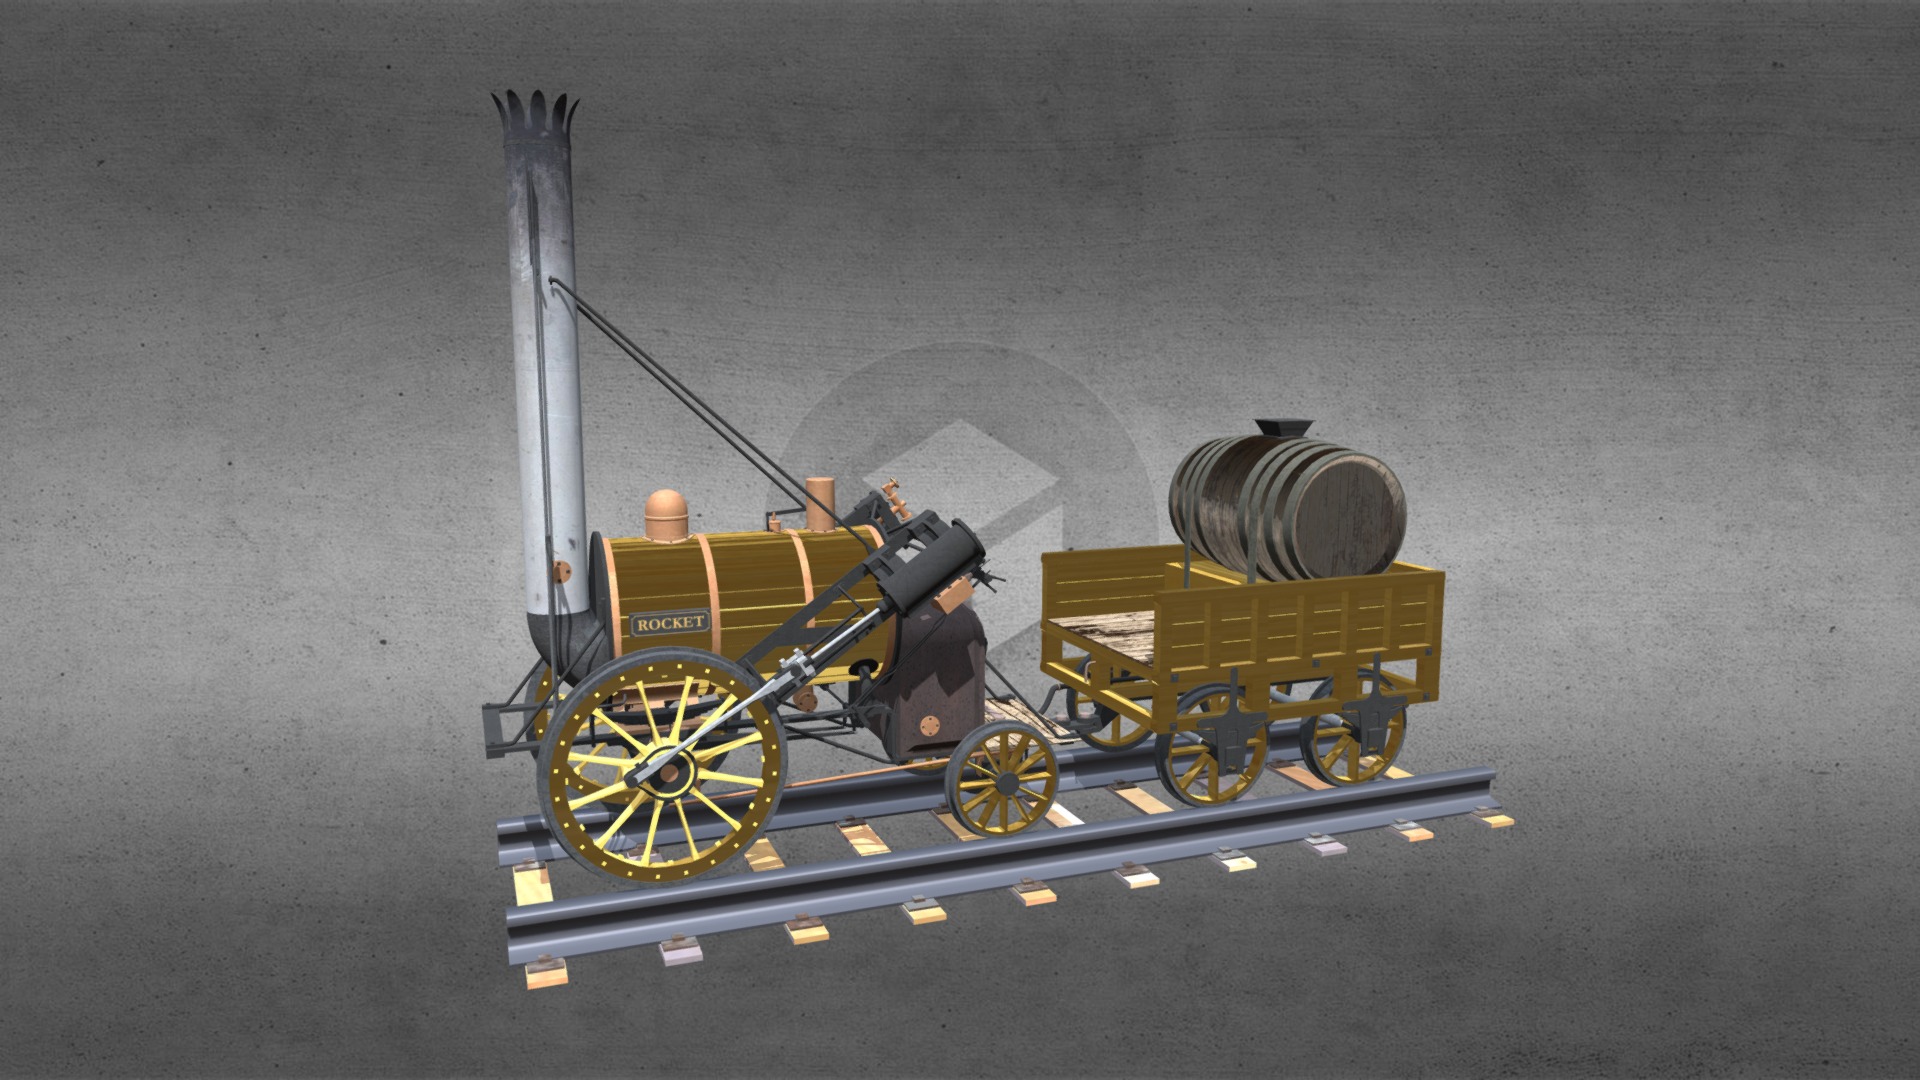 3D model Rocket Train - This is a 3D model of the Rocket Train. The 3D model is about a toy train on a table.